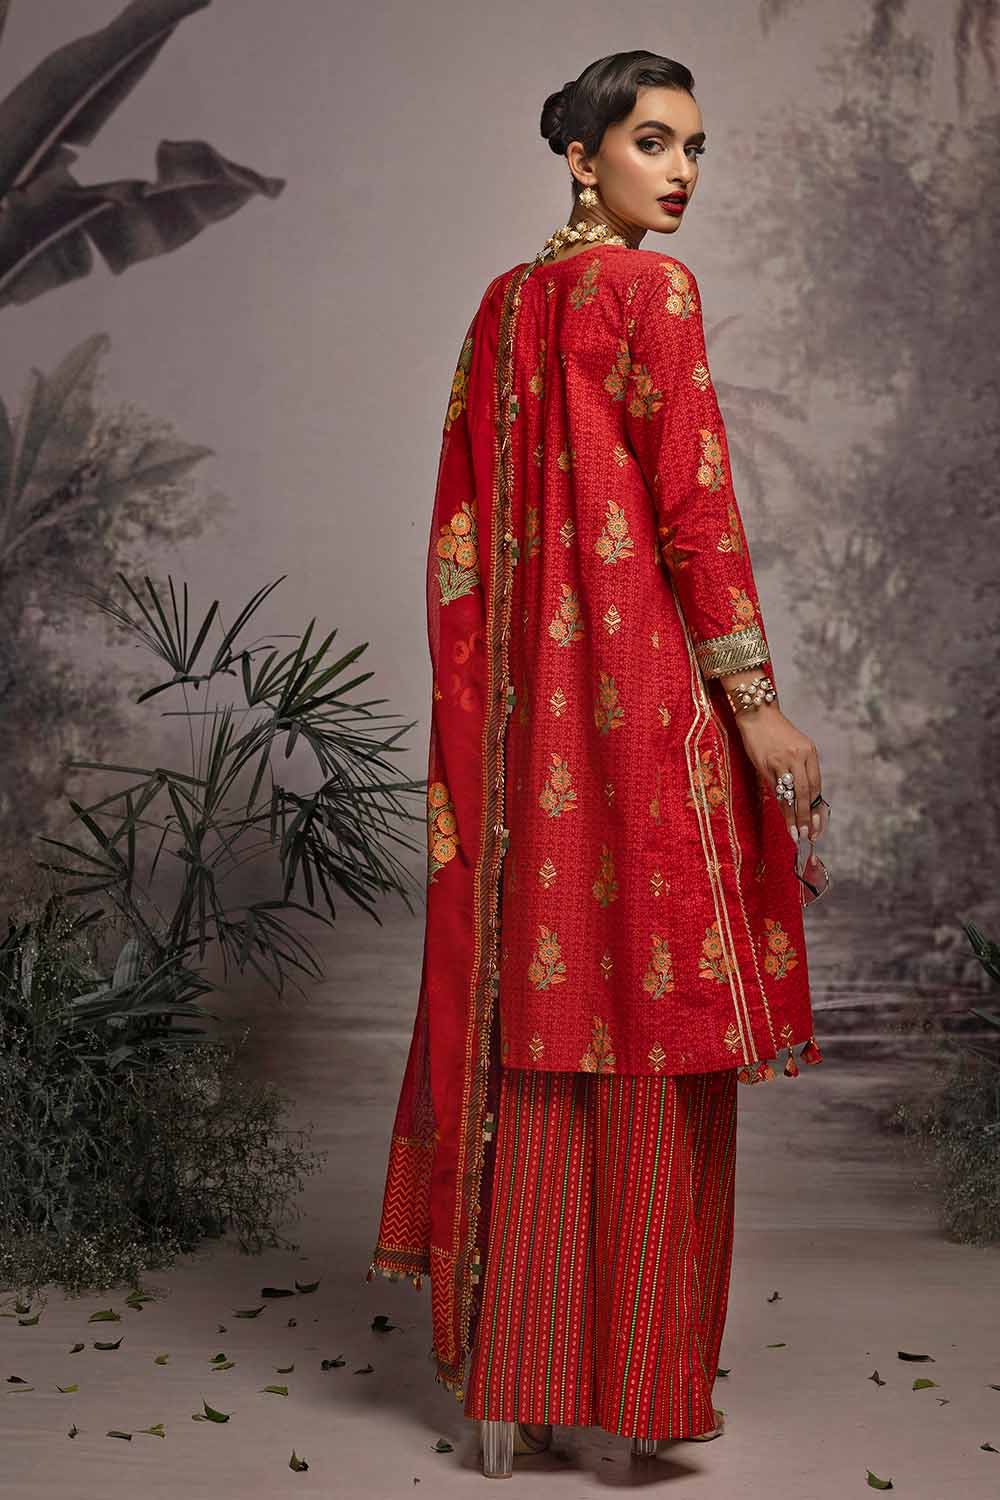 Gul Ahmed 3PC Embroidered Gold and Lacquer Printed Lawn Suit with Cotton Net Dupatta CN-32026